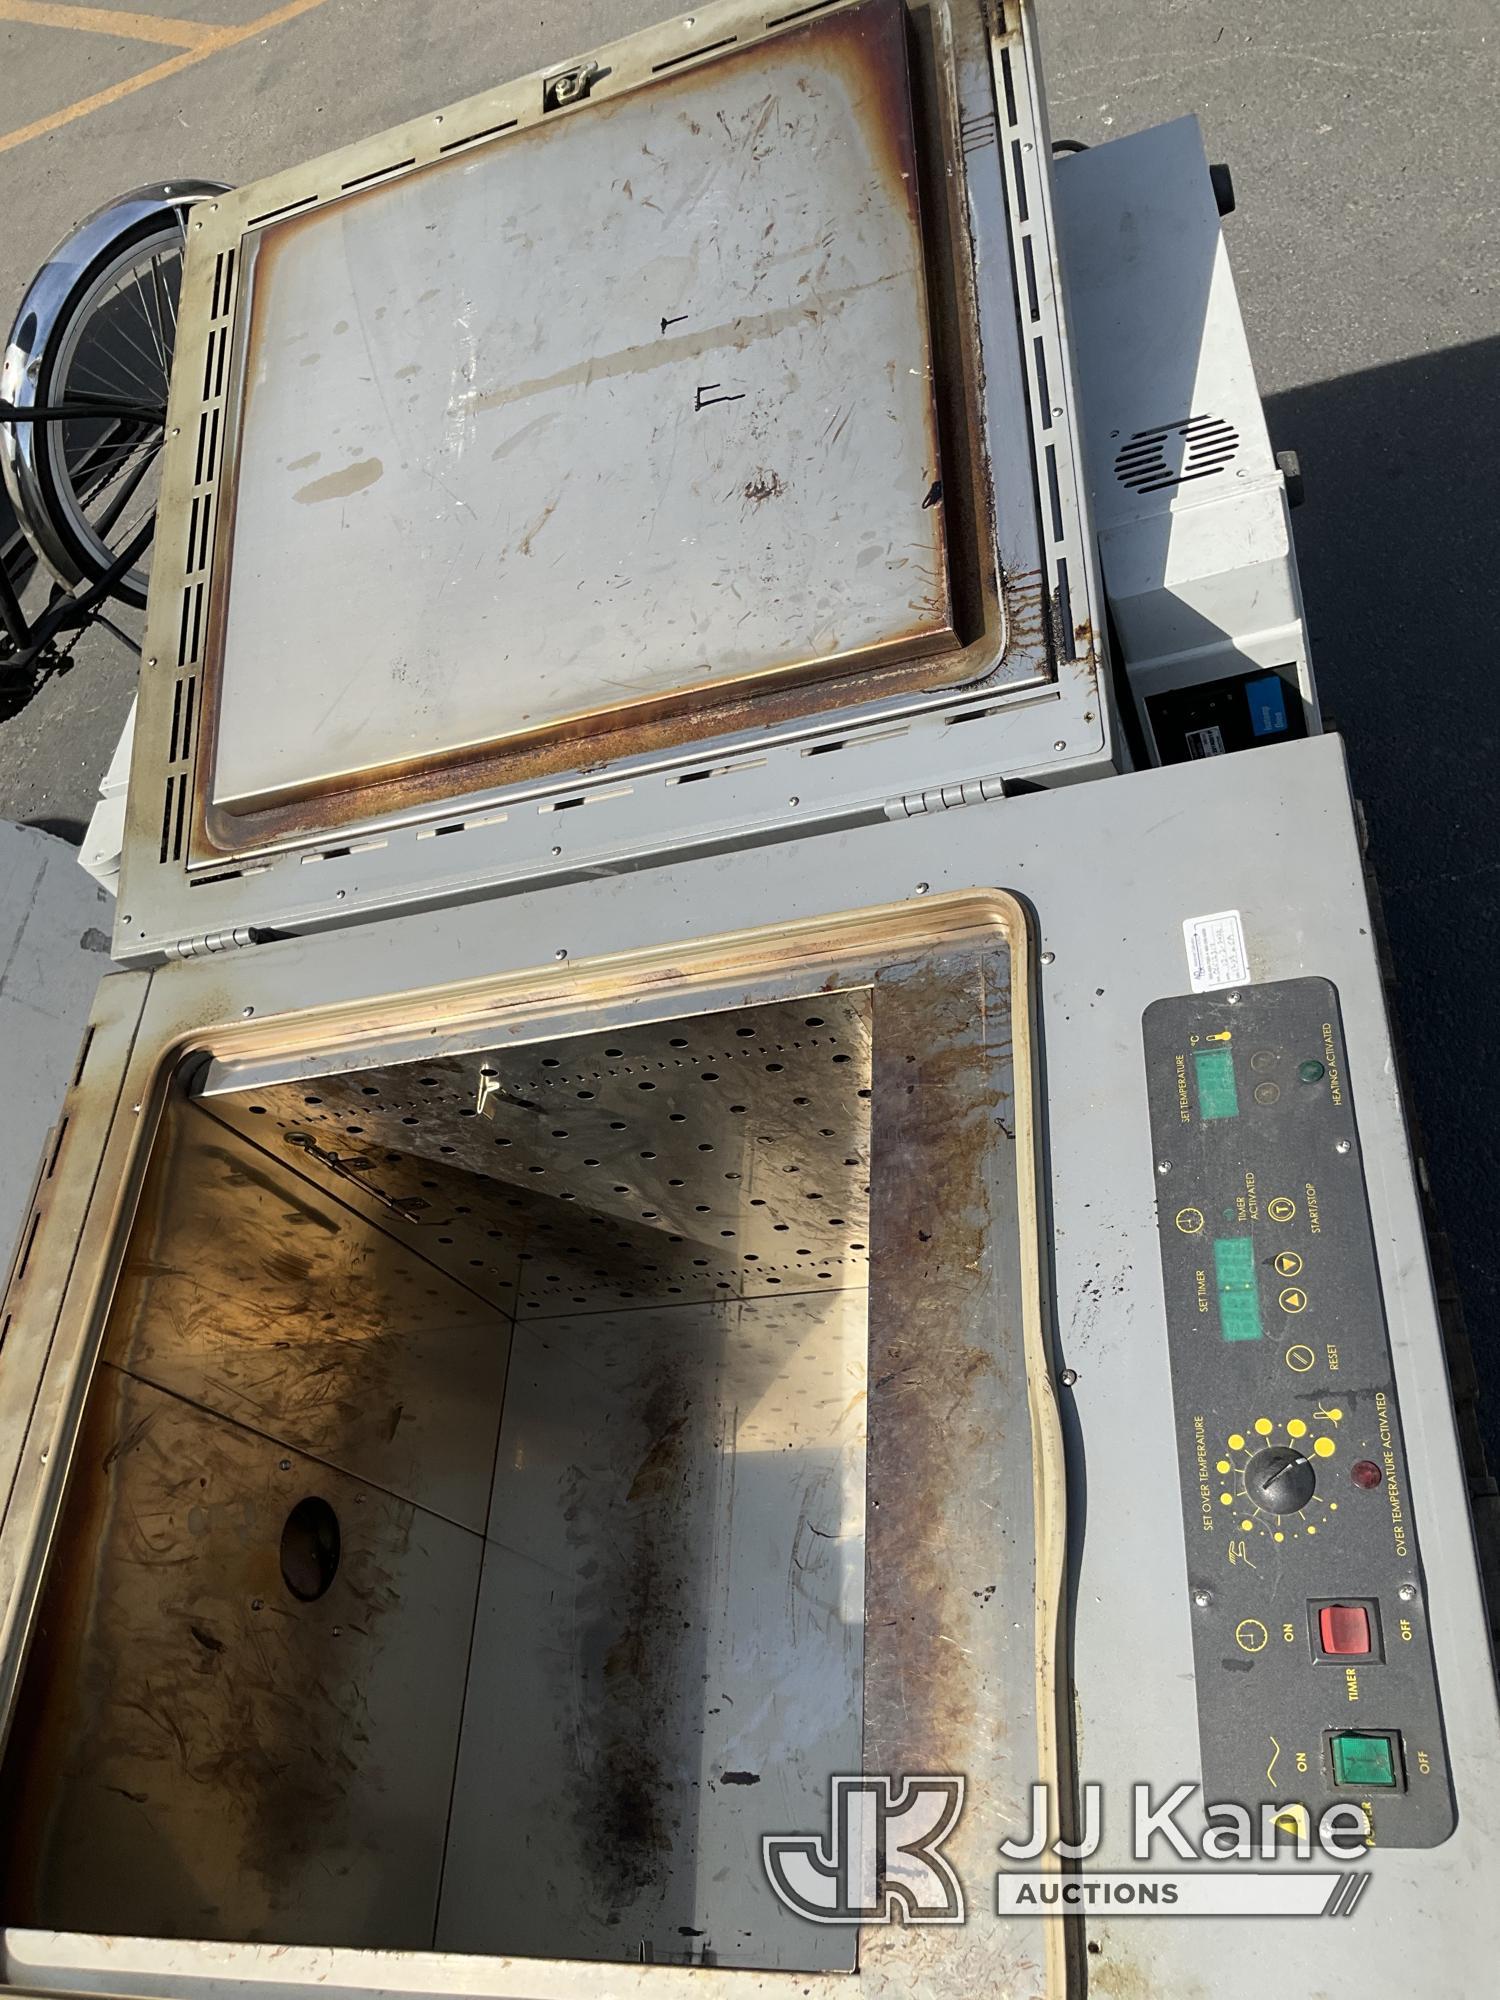 (Jurupa Valley, CA) 2 Heating Ovens (Used) NOTE: This unit is being sold AS IS/WHERE IS via Timed Au